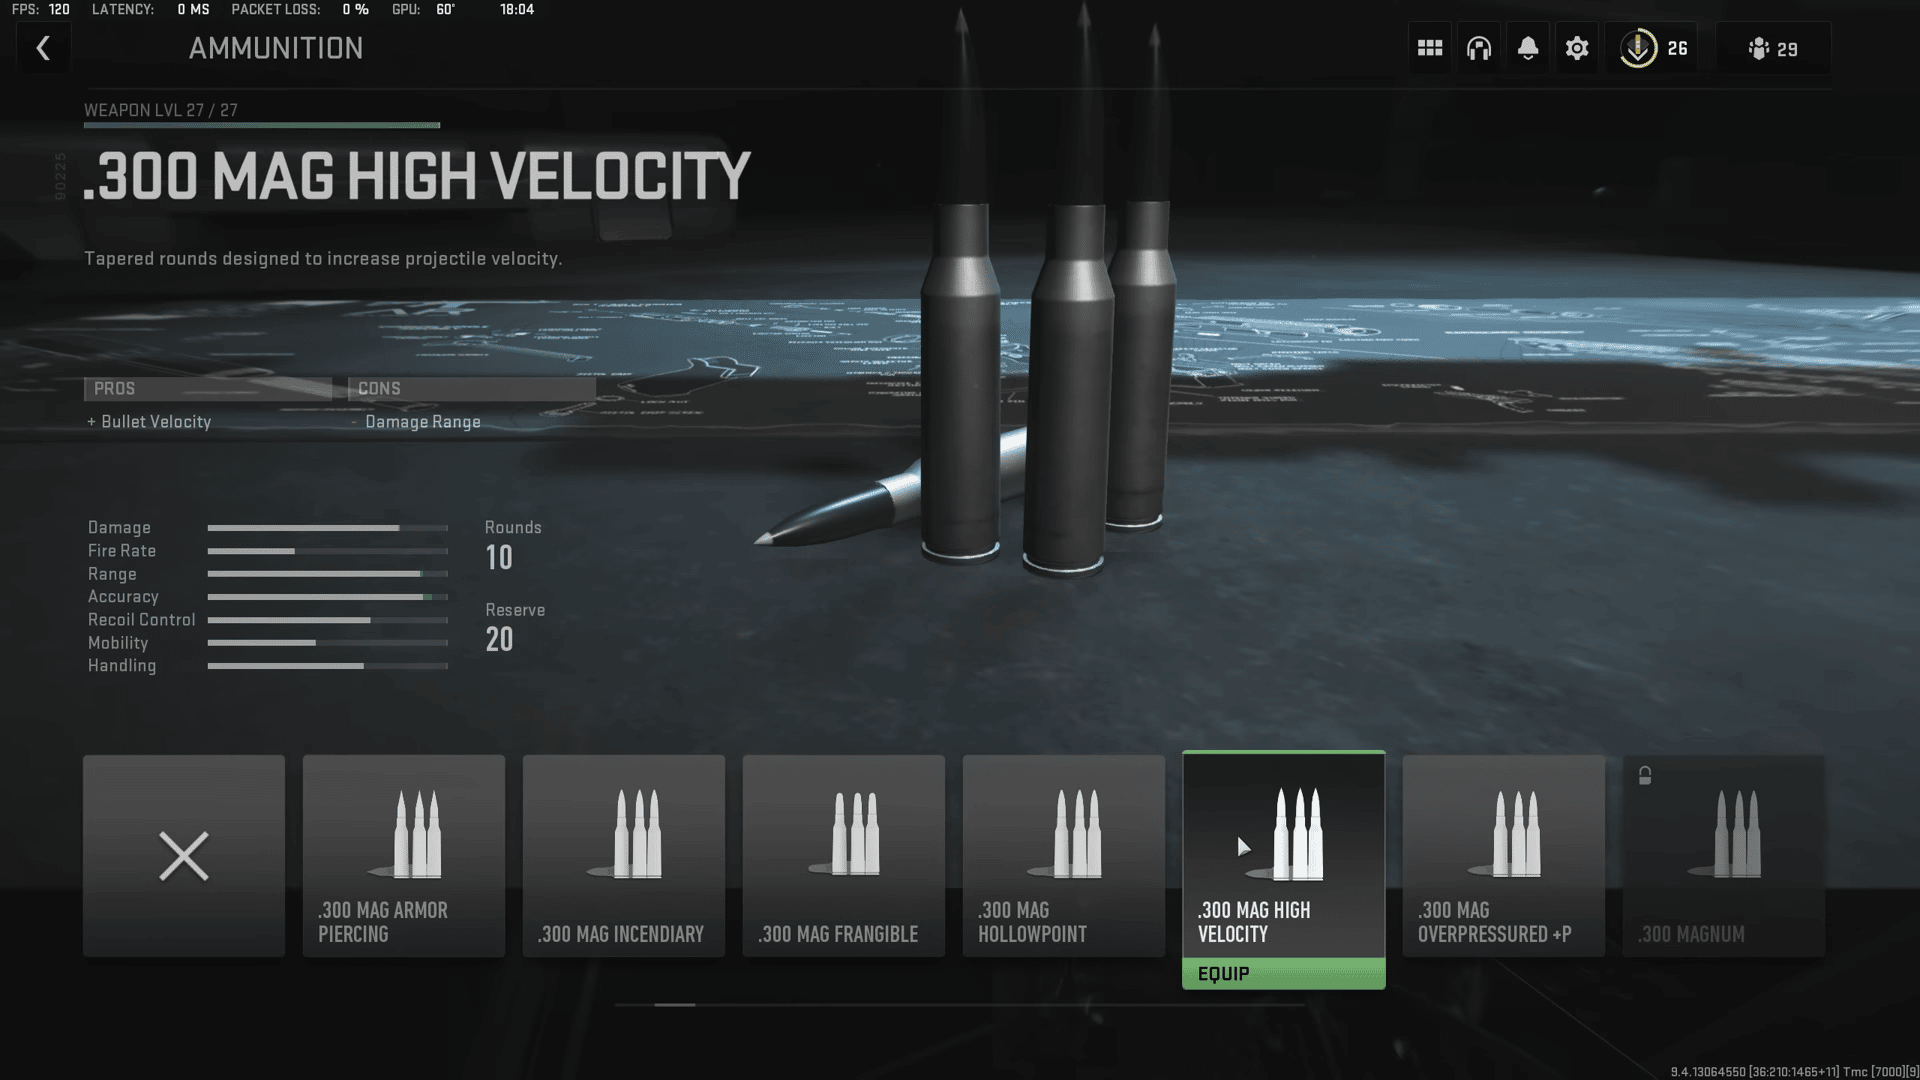 This ammunition gives your bullets more velocity